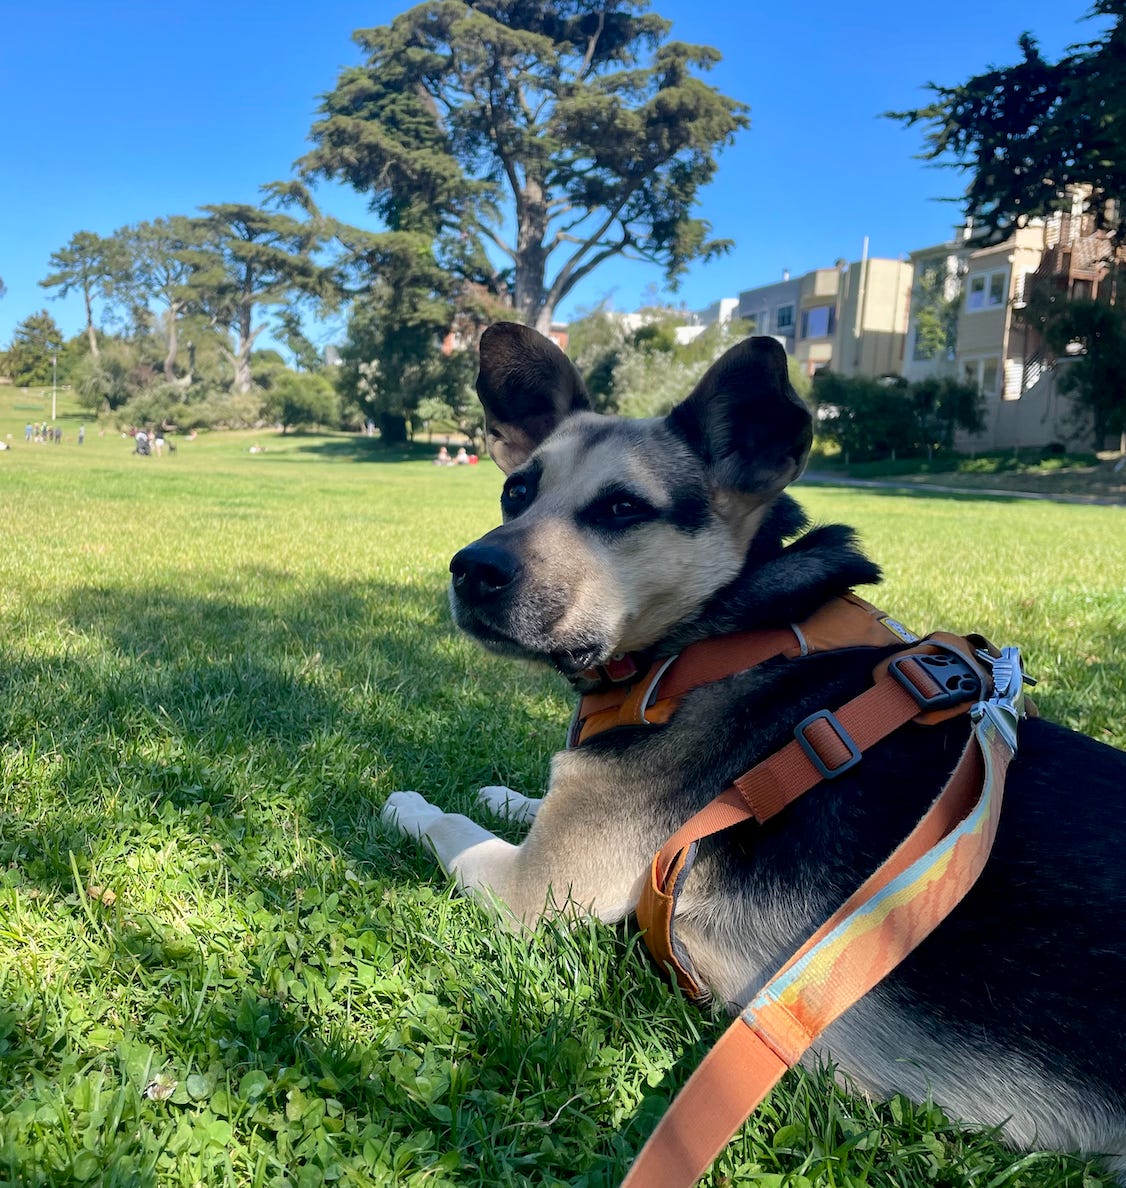 Black and brown dog in orange harness looks over shoulder at camera, laying on grass with trees and a blue sky in background